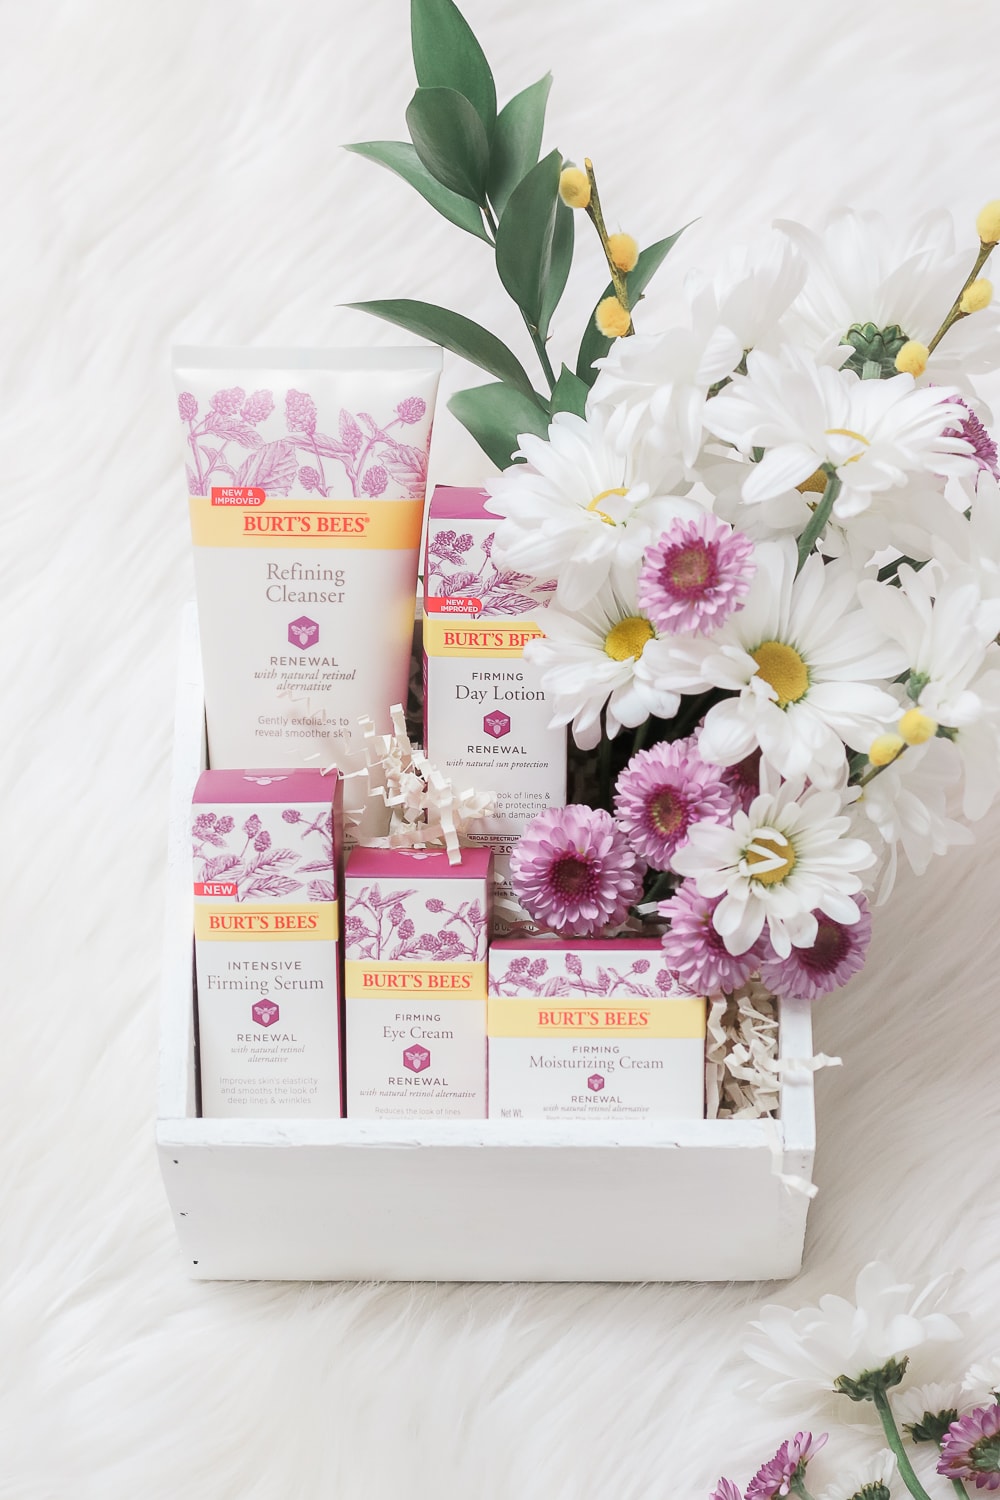 Burt's Bees gift basket featuring products from the Burt's Bees Renewal skincare line by beauty blogger Stephanie Ziajka on Diary of a Debutante 